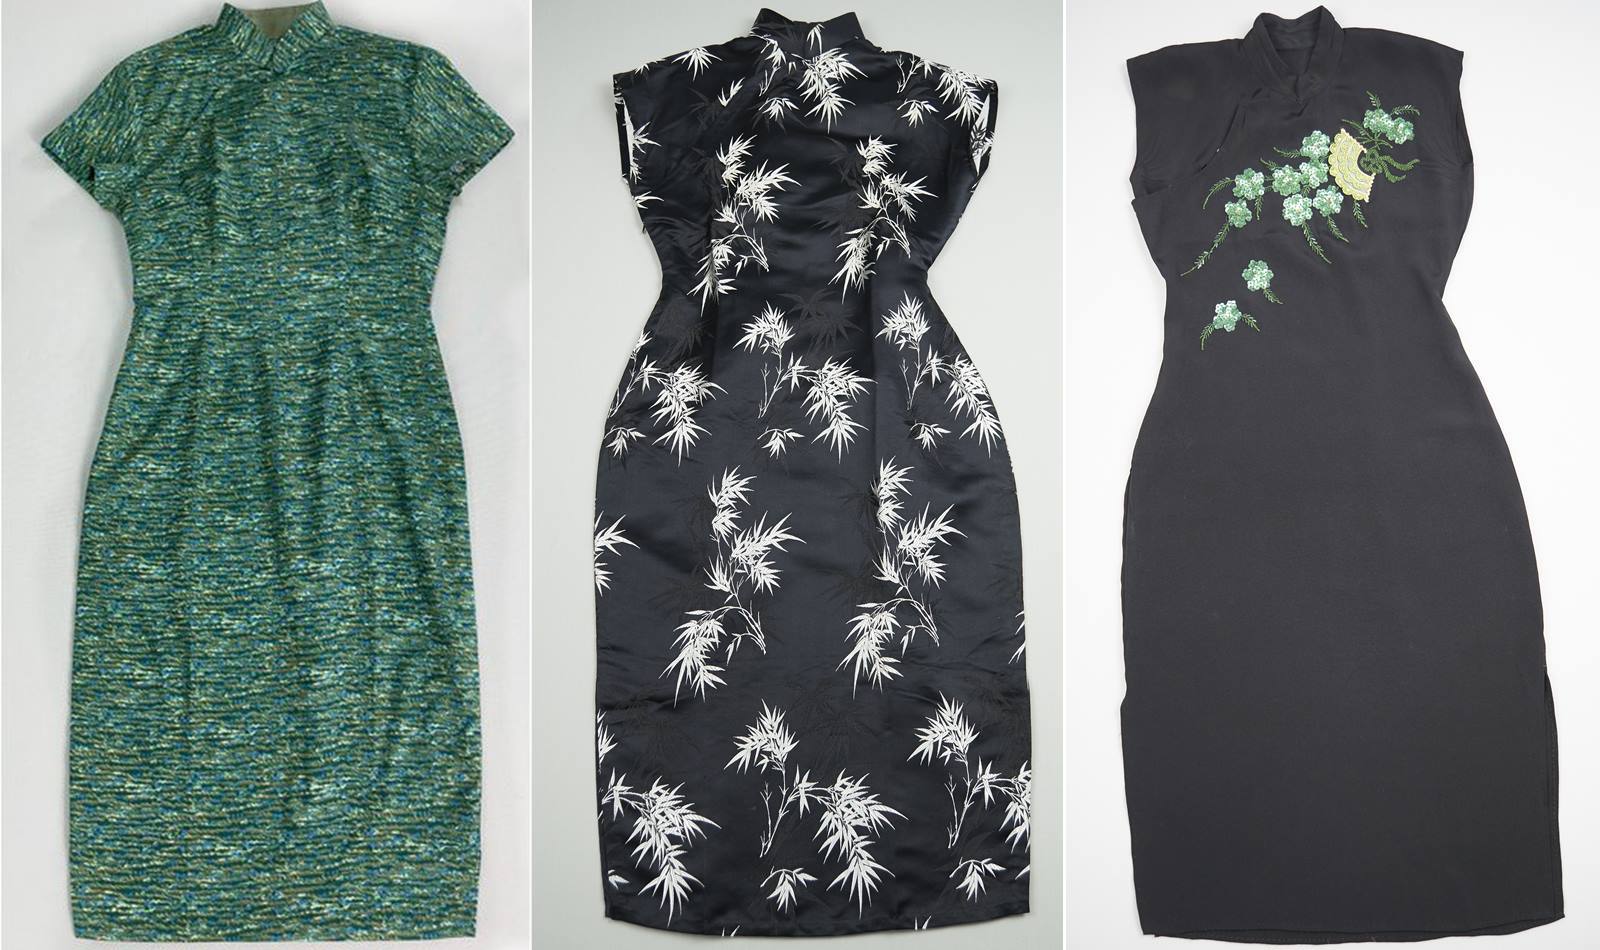 Three of the four cheongsams donated to the museum. The green one (extreme left) is a day cheongsam, while the two black ones (one with a floral pattern and the other beaded) are for evening-wear.